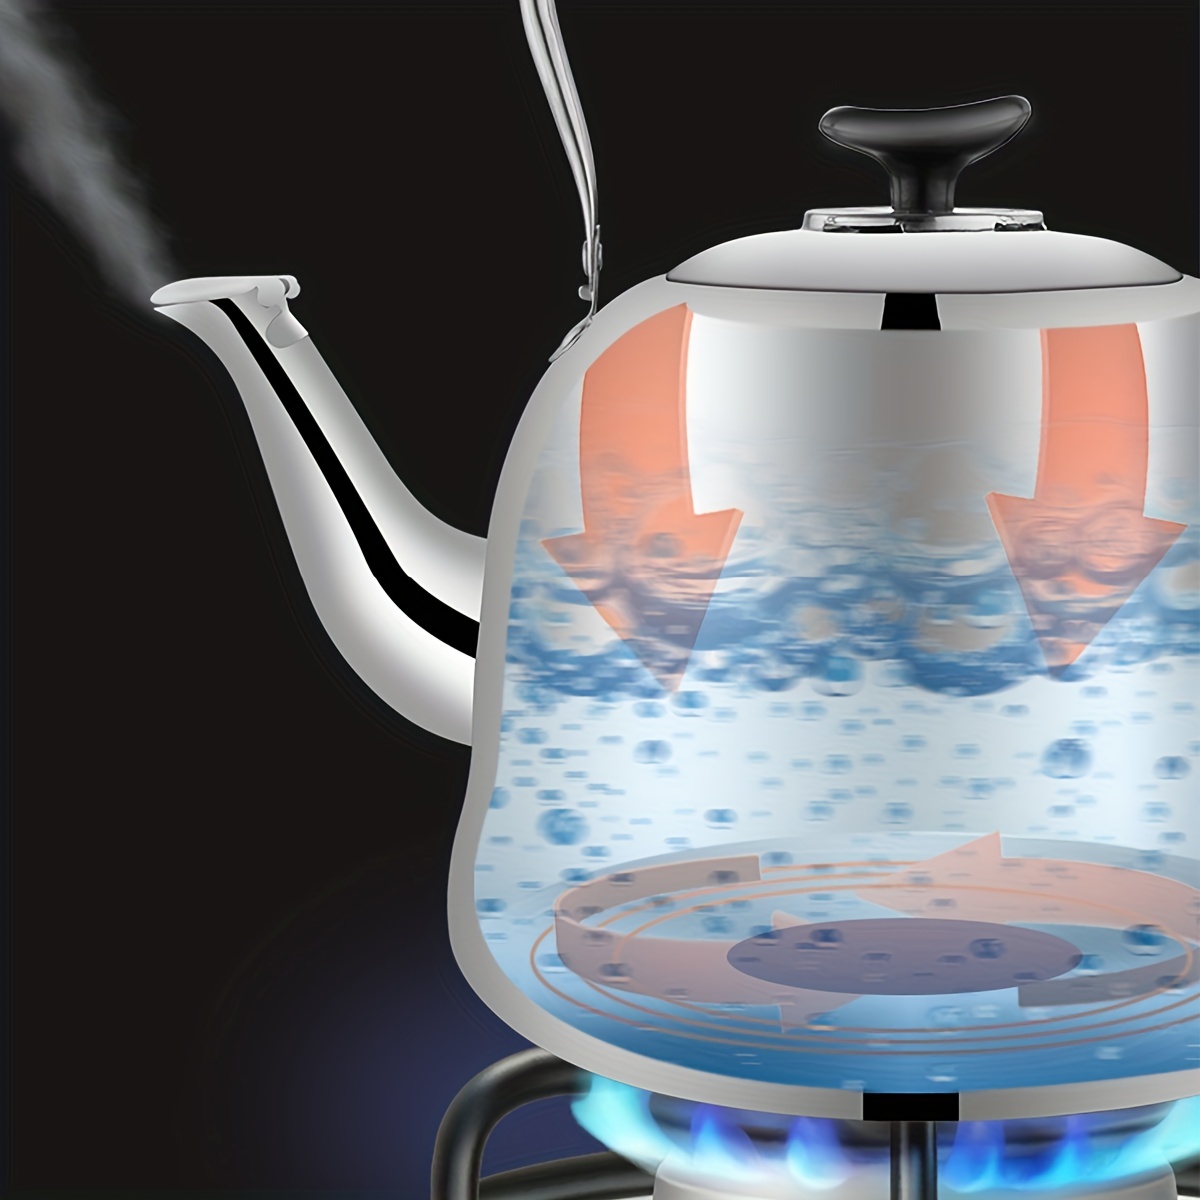 Hot Water Boiler Whistling Tea Kettle for Stovetop Heating Water Kitchen